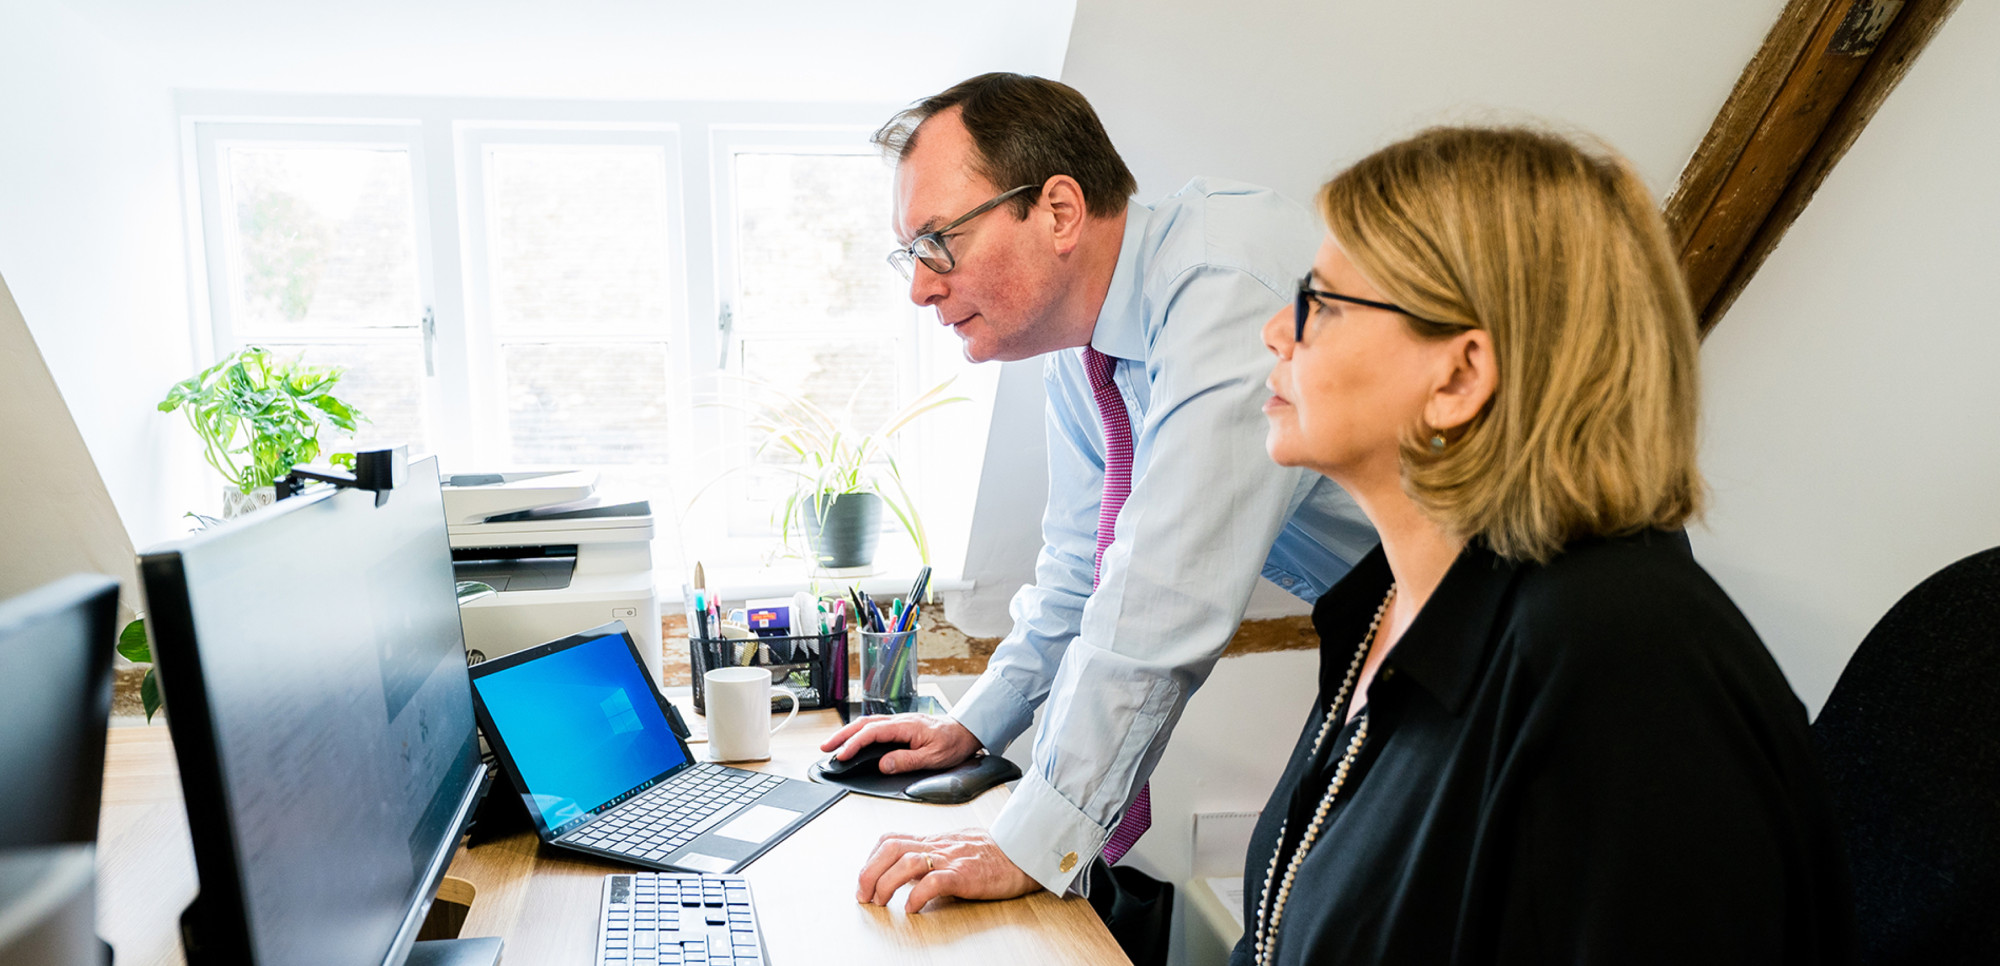 Paul Willans and Nicky Mowat from AJB Wealth in the Alresford office